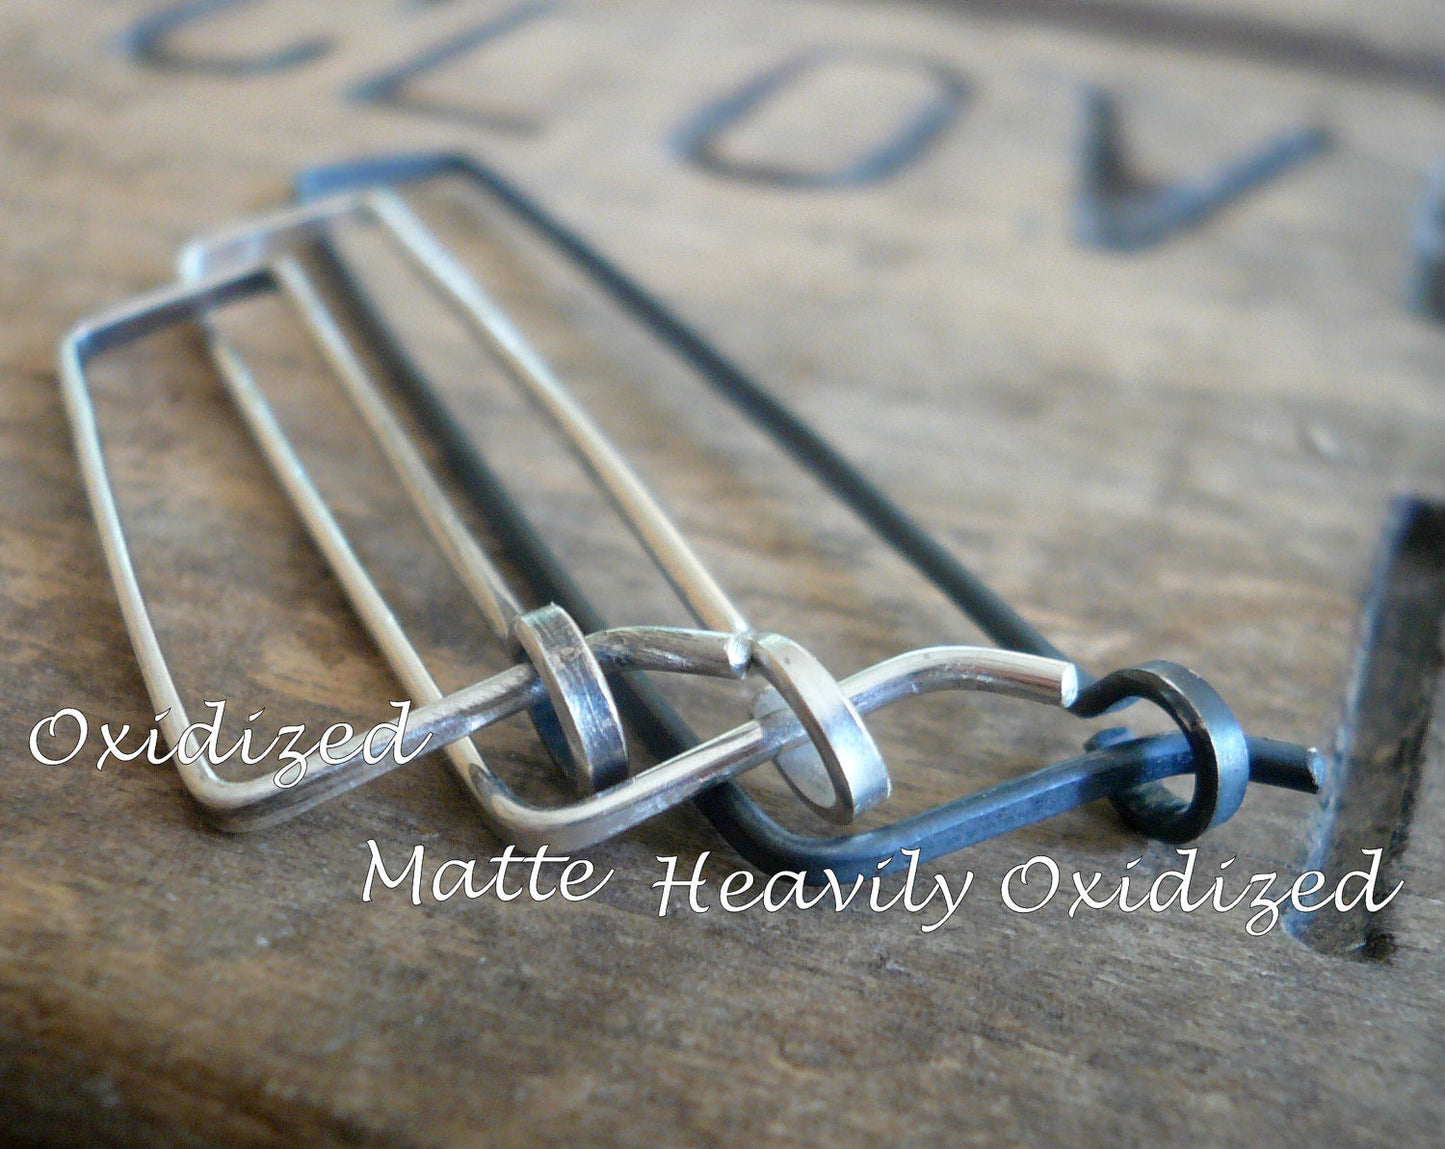 Svelte Hoops Small - Handmade. Hand forged. Oxidized Sterling Silver Earrings